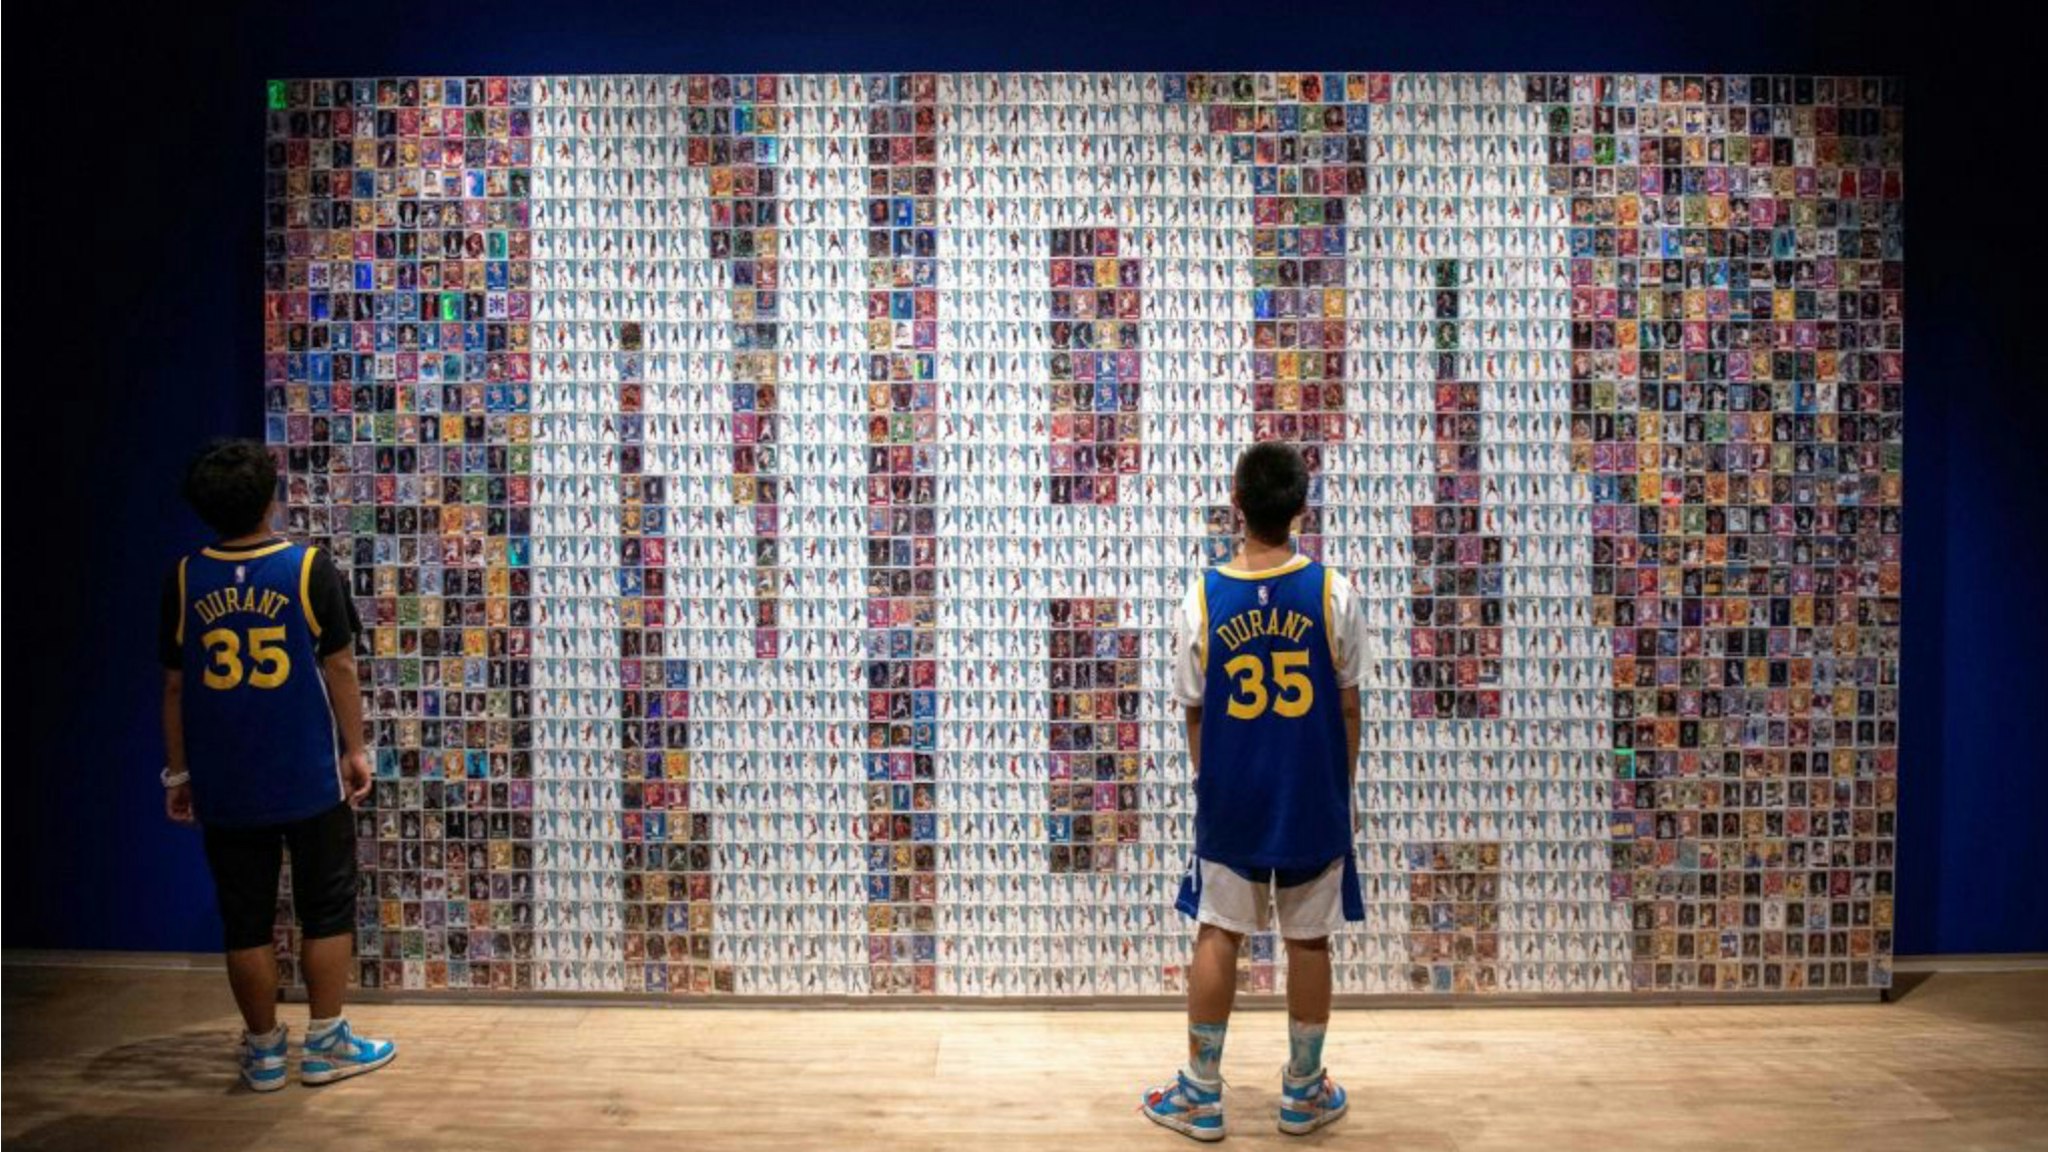 Two Chinese youths stand in front of a wall displaying basketball trading cards at the NBA exhibition in Beijing on August 19, 2019. - The Basketball world cup will be held from August 31 to September 15 2019 in China.